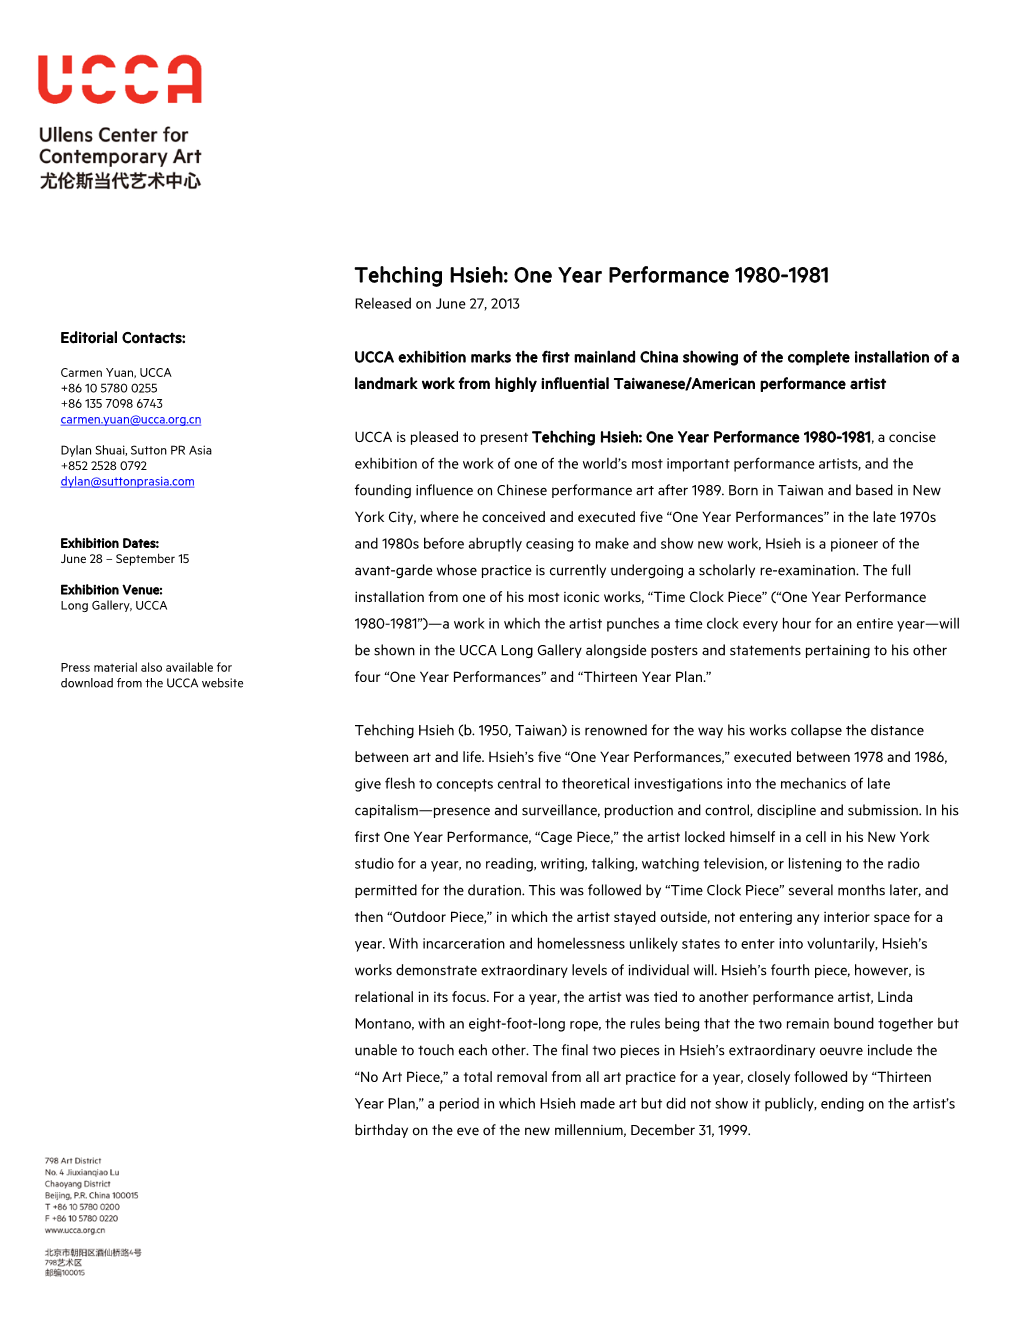 Tehching Hsieh: One Year Performance 1980-1981 Released on June 27, 2013